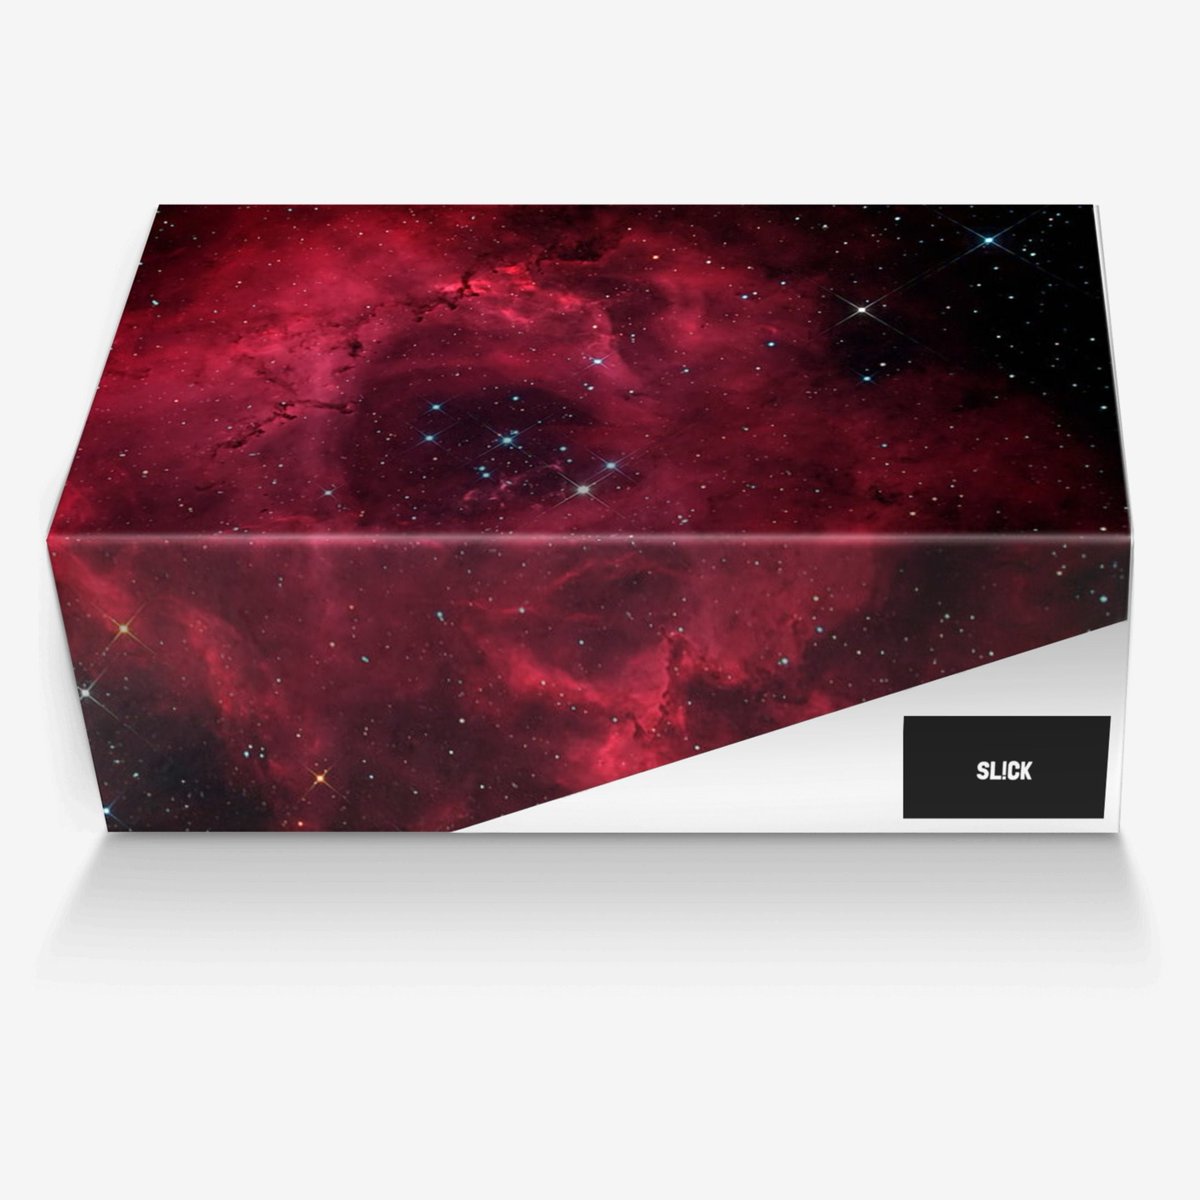 Tell us what you think about out Design on our BOXES!!

#shoetrends #sliick #wearitright #sneakers #onlineshopping 
#oi_couture  #Trending #SNKRS #sneakerhead #LimitedEdition #bulk #love #friyay